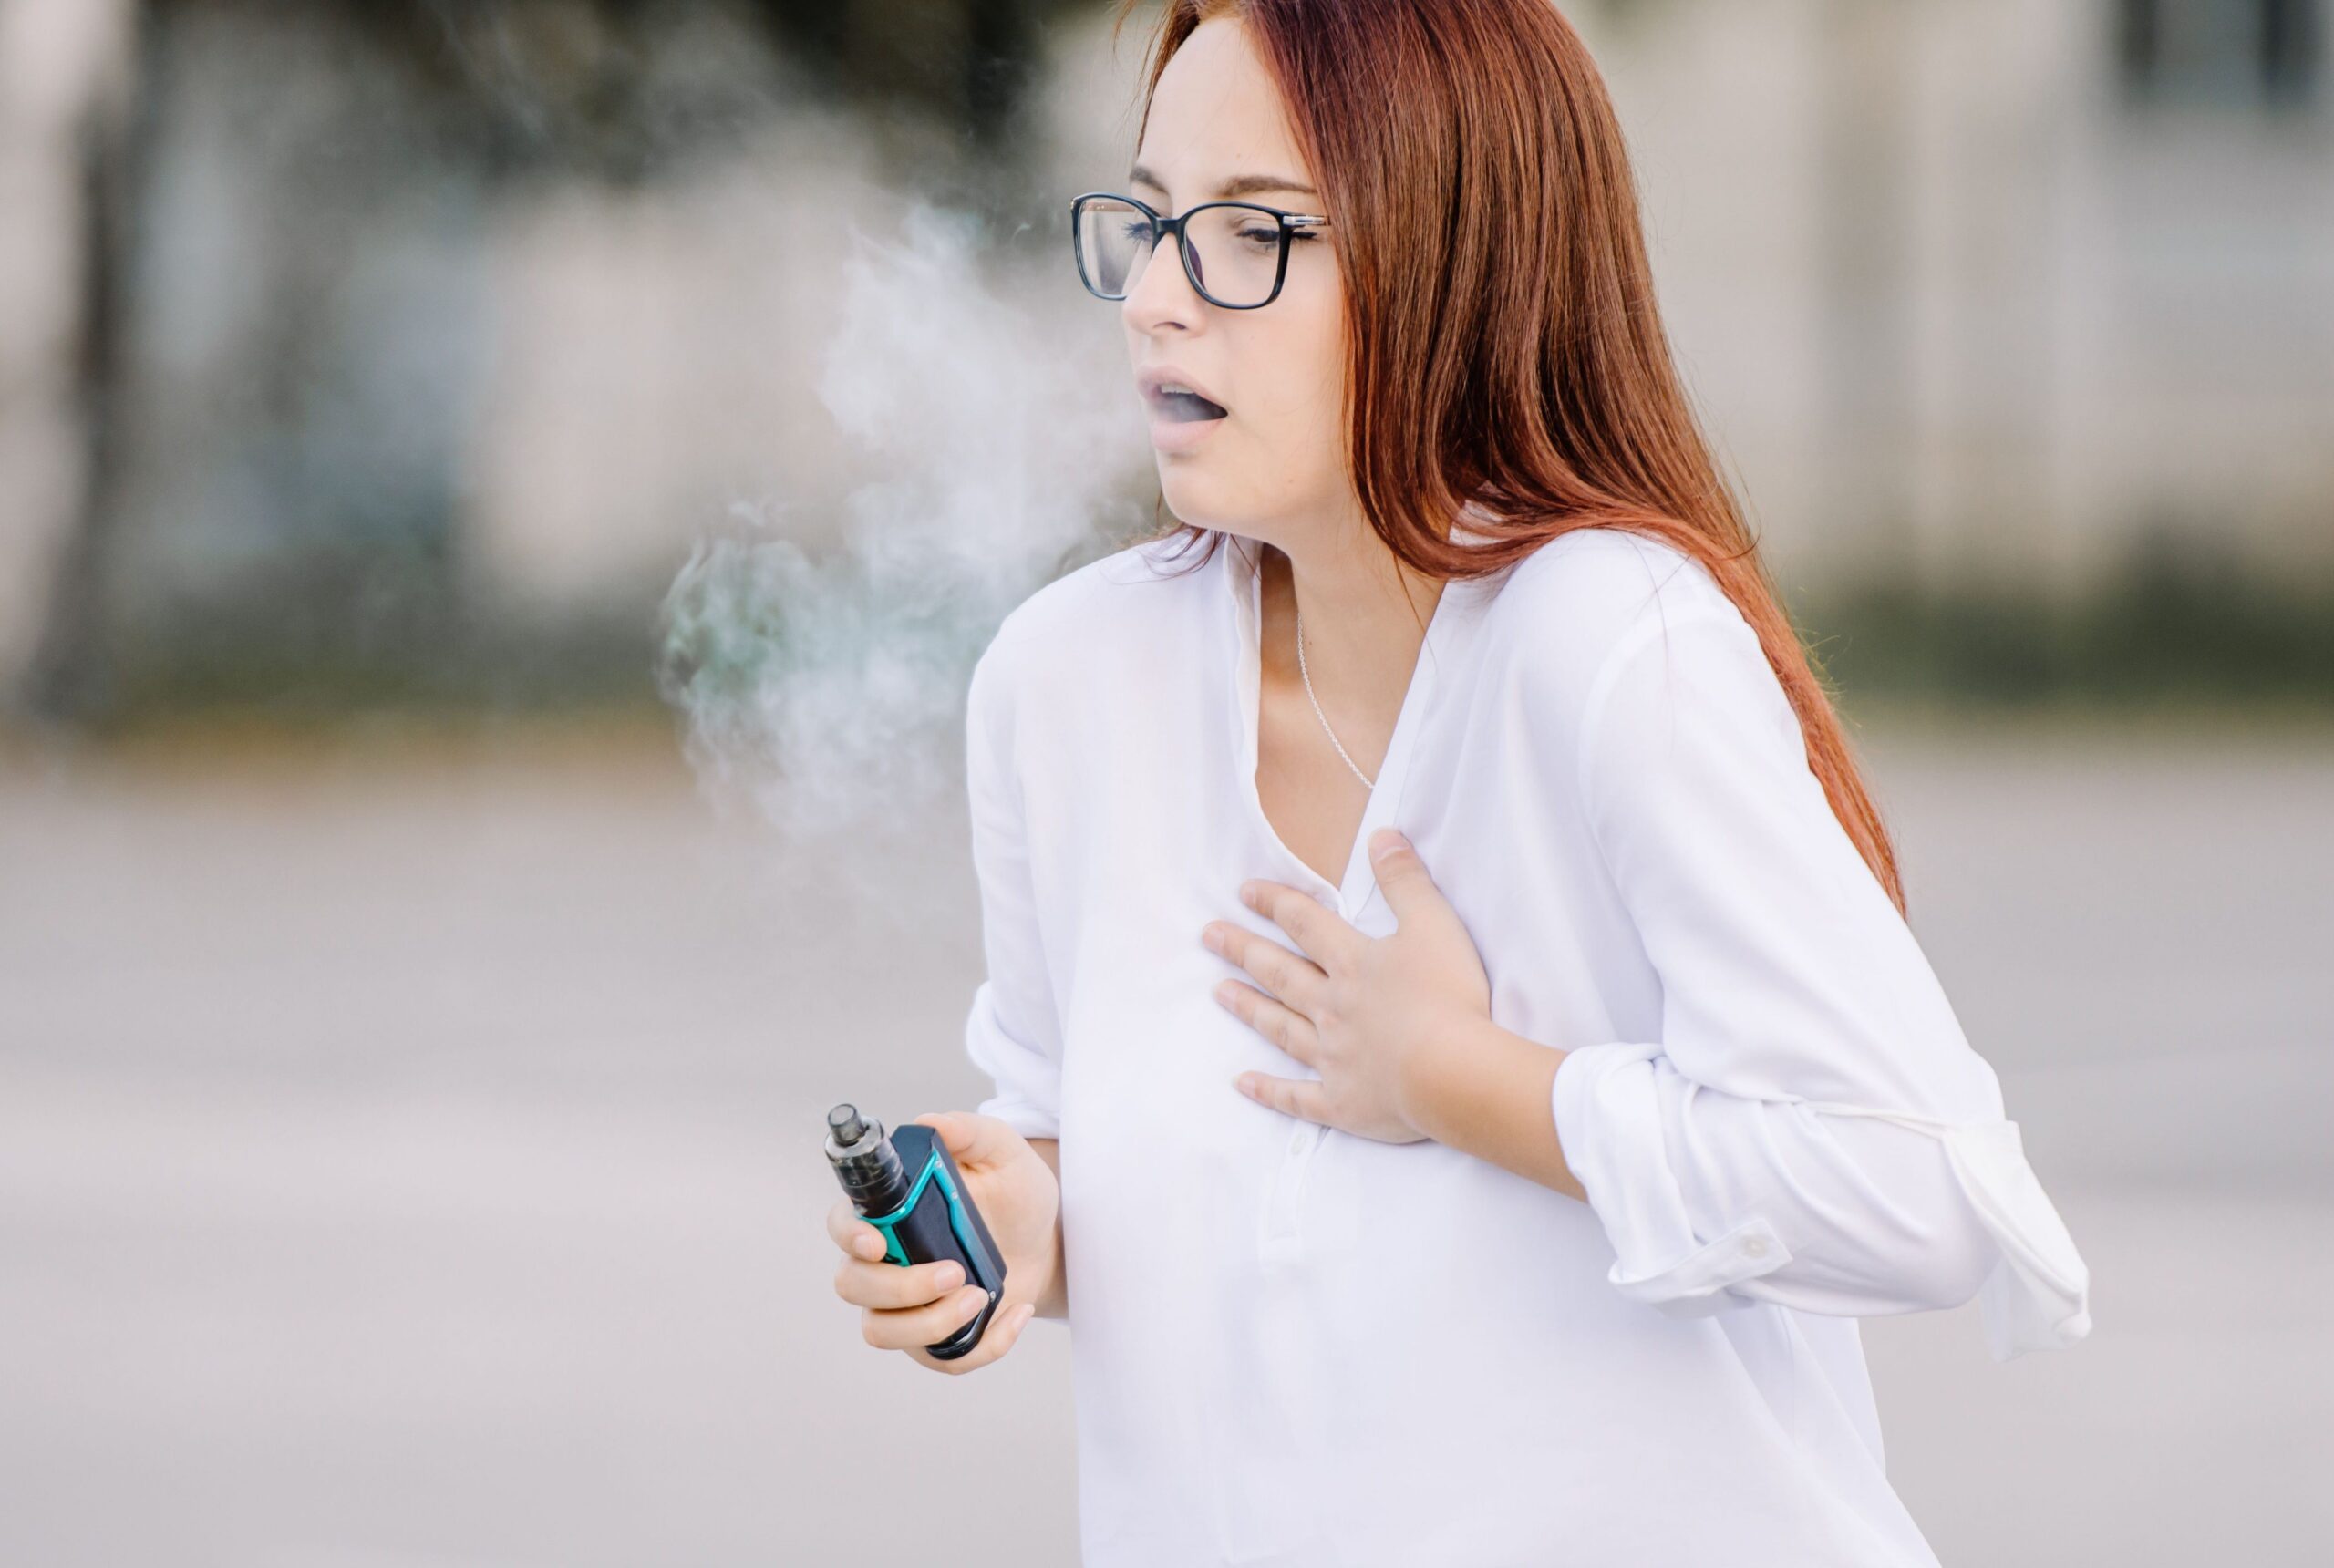 A young woman coughing after vaping